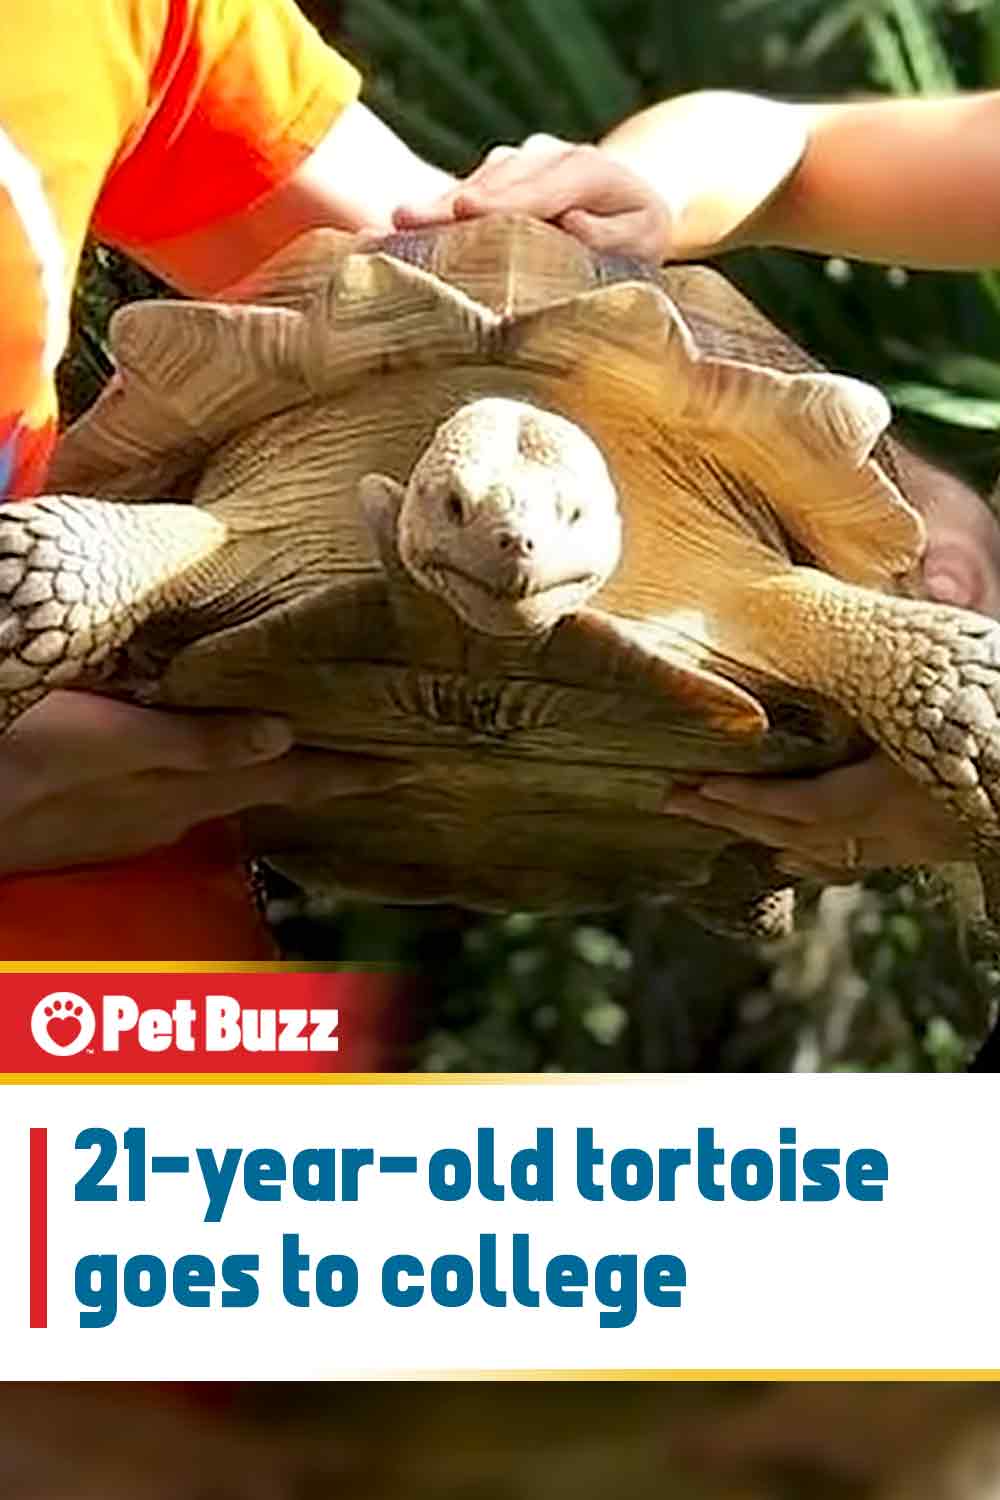 21-year-old tortoise goes to college